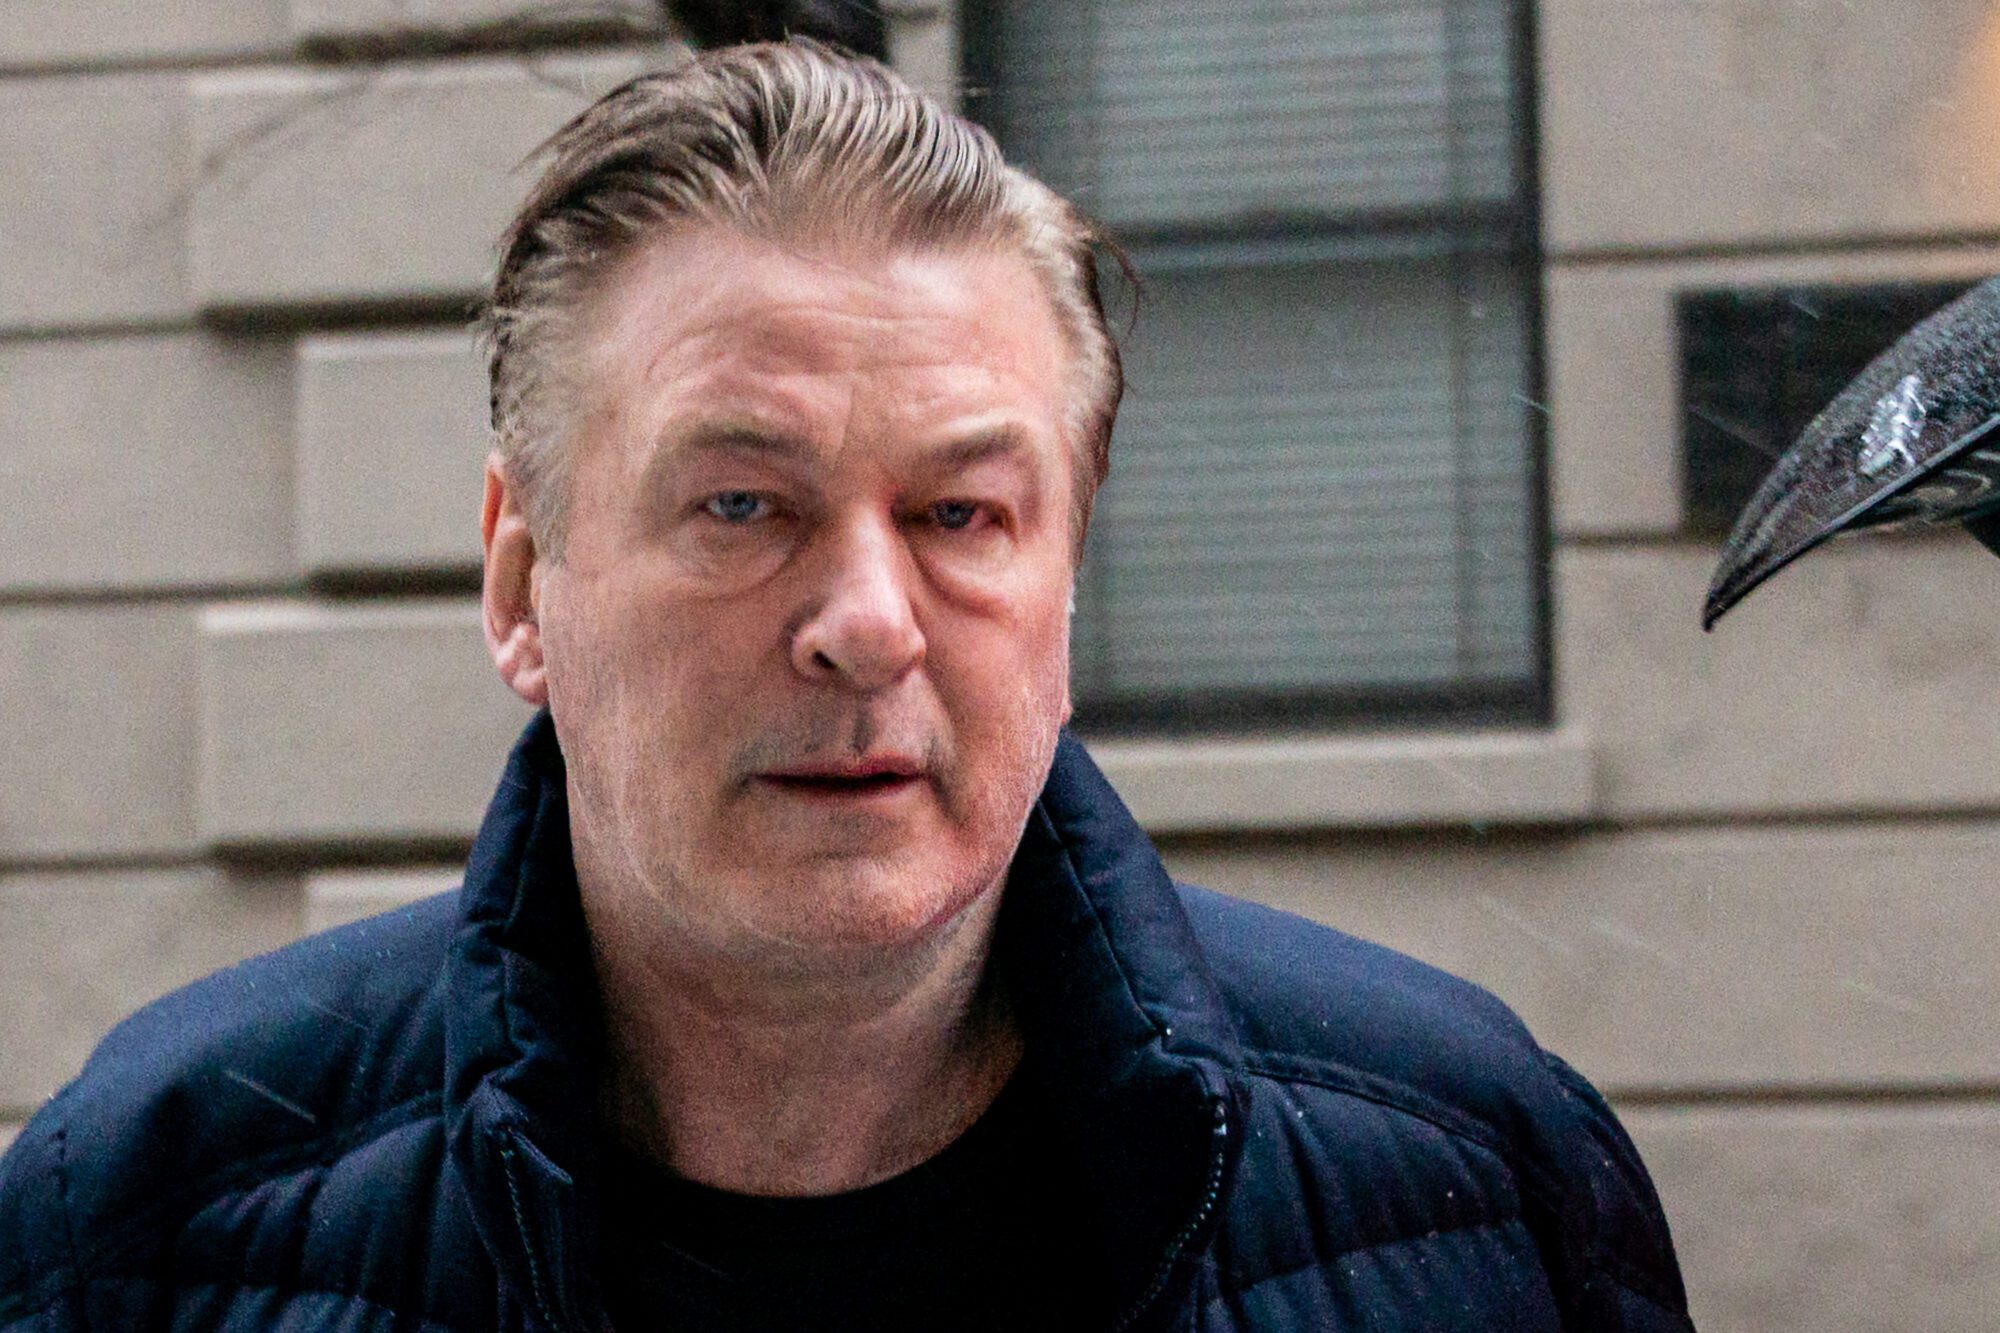 FILE PHOTO: Actor Alec Baldwin departs his home, as he will be charged with involuntary manslaughter for the fatal shooting of cinematographer Halyna Hutchins on the set of the movie "Rust",  in New York, U.S., January 31, 2023. REUTERS/David 'Dee' Delgado